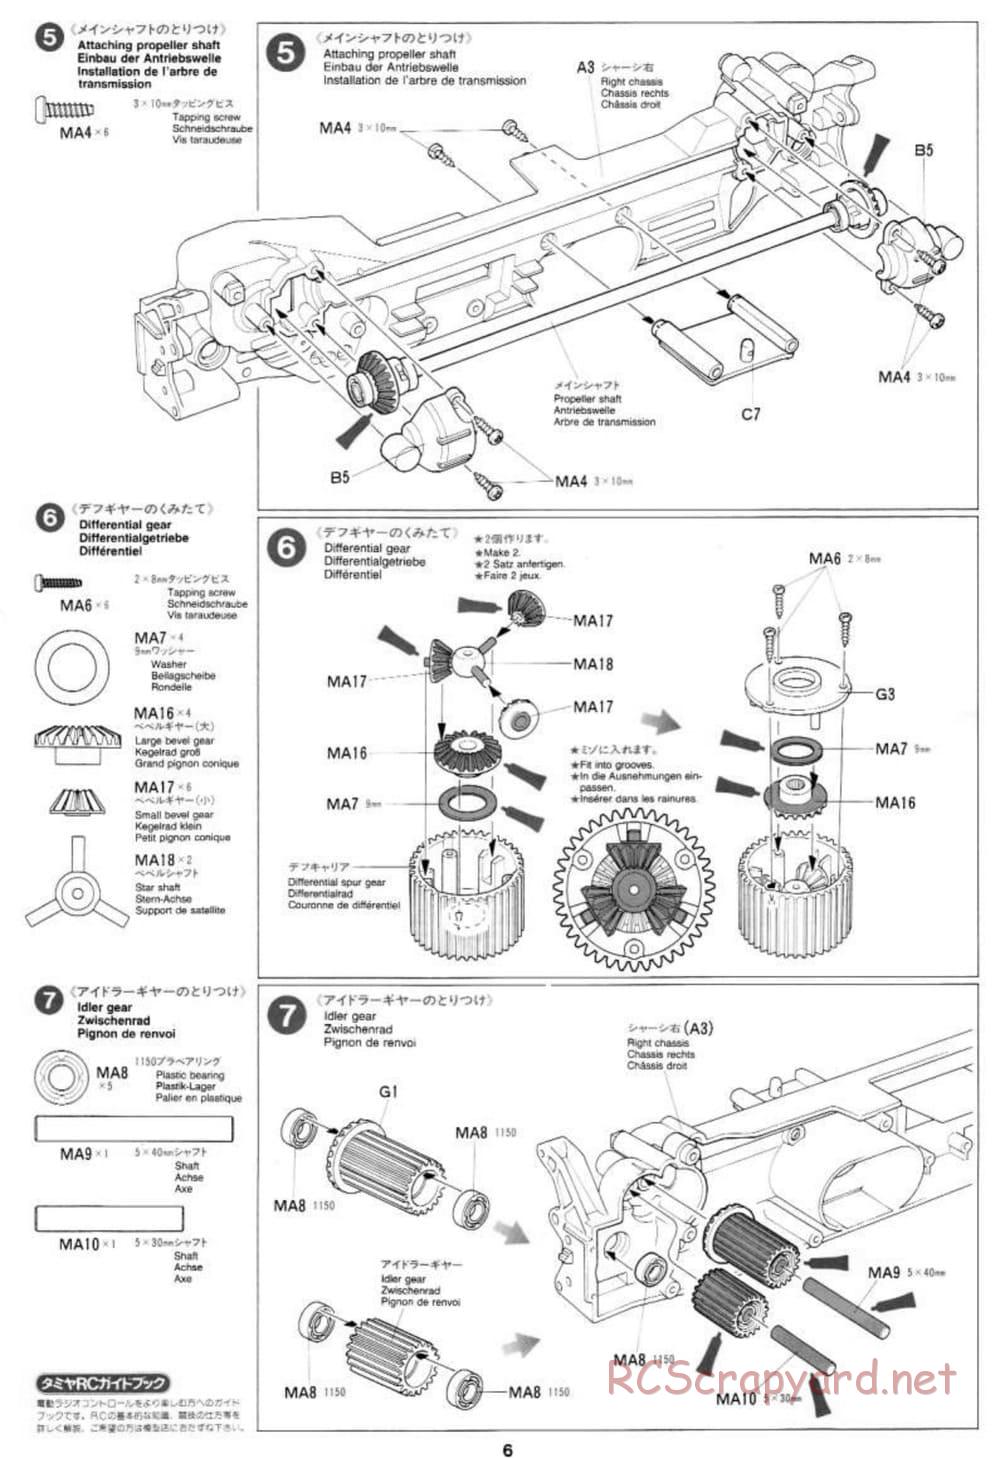 Tamiya - Toyota Celica GT-Four 97 Monte Carlo - TL-01 Chassis - Manual - Page 6